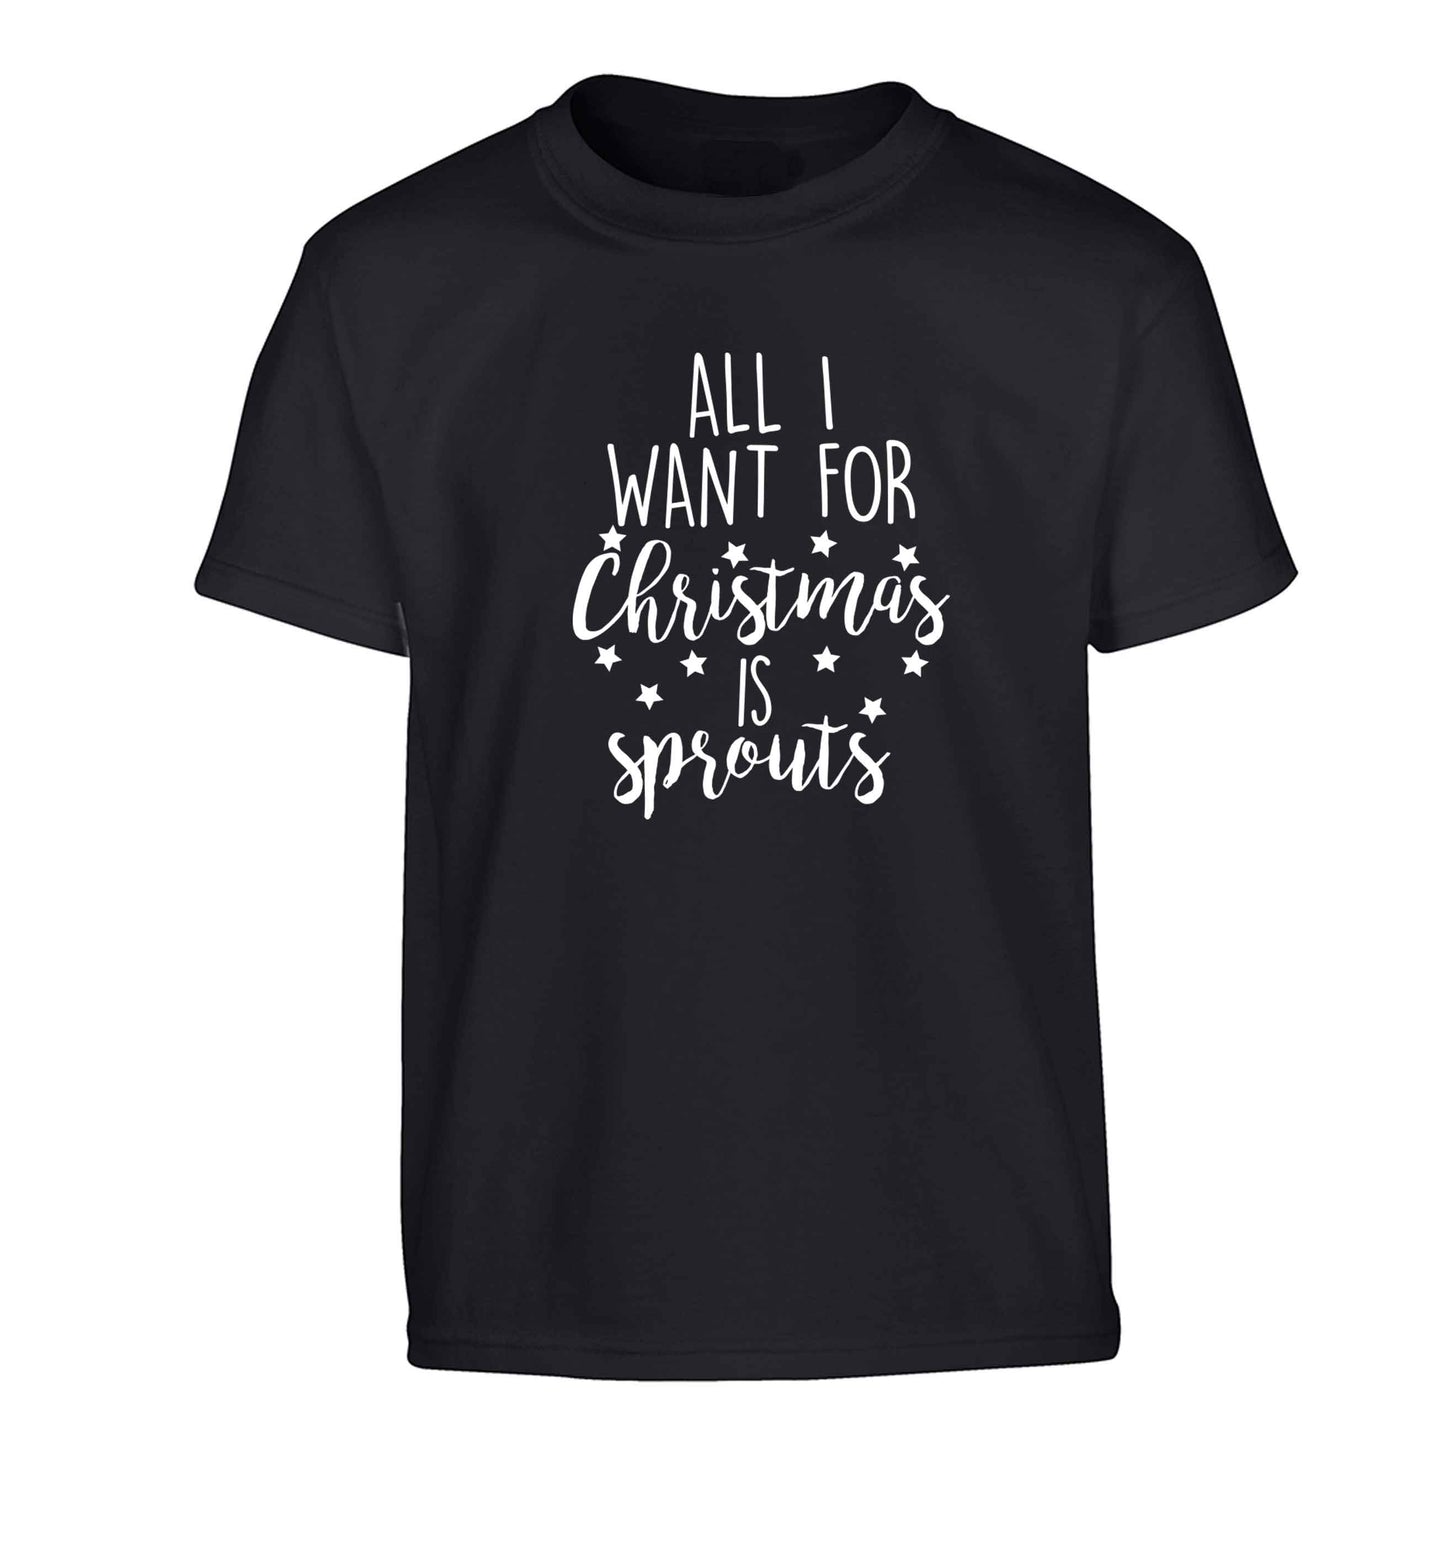 All I want for Christmas is sprouts Children's black Tshirt 12-13 Years